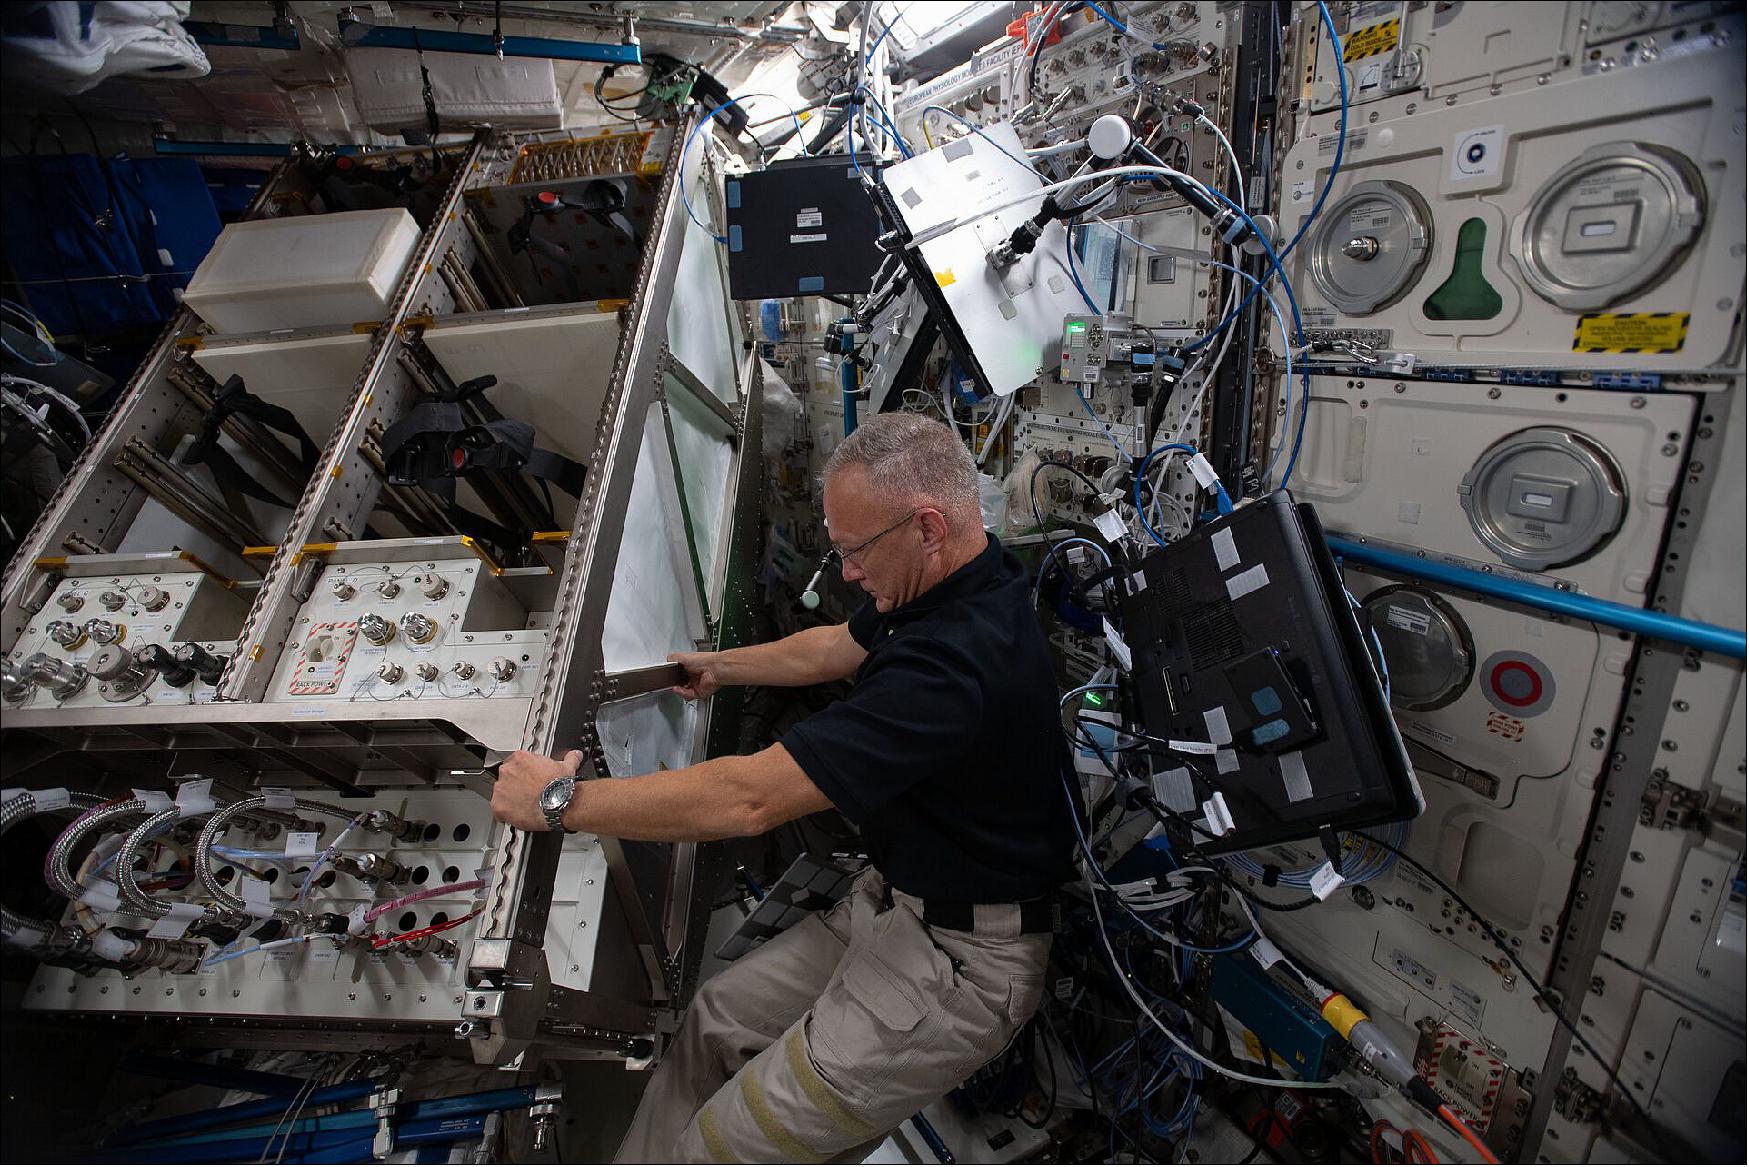 Figure 12: NASA astronauts Bob Behnken and Doug Hurley maneuvered the fridge-sized European Drawer Rack Mark 2(EDR2) to its new position. EDR2 is designed to run in parallel with the original European Drawer Rack, providing even greater opportunities for science in space. A feat that would be much more difficult on Earth, installing EDR-2 in weightlessness was not exactly physically taxing, but required careful maneuvering in the limited space. Watch a video of the installation (image credit: ESA/NASA)